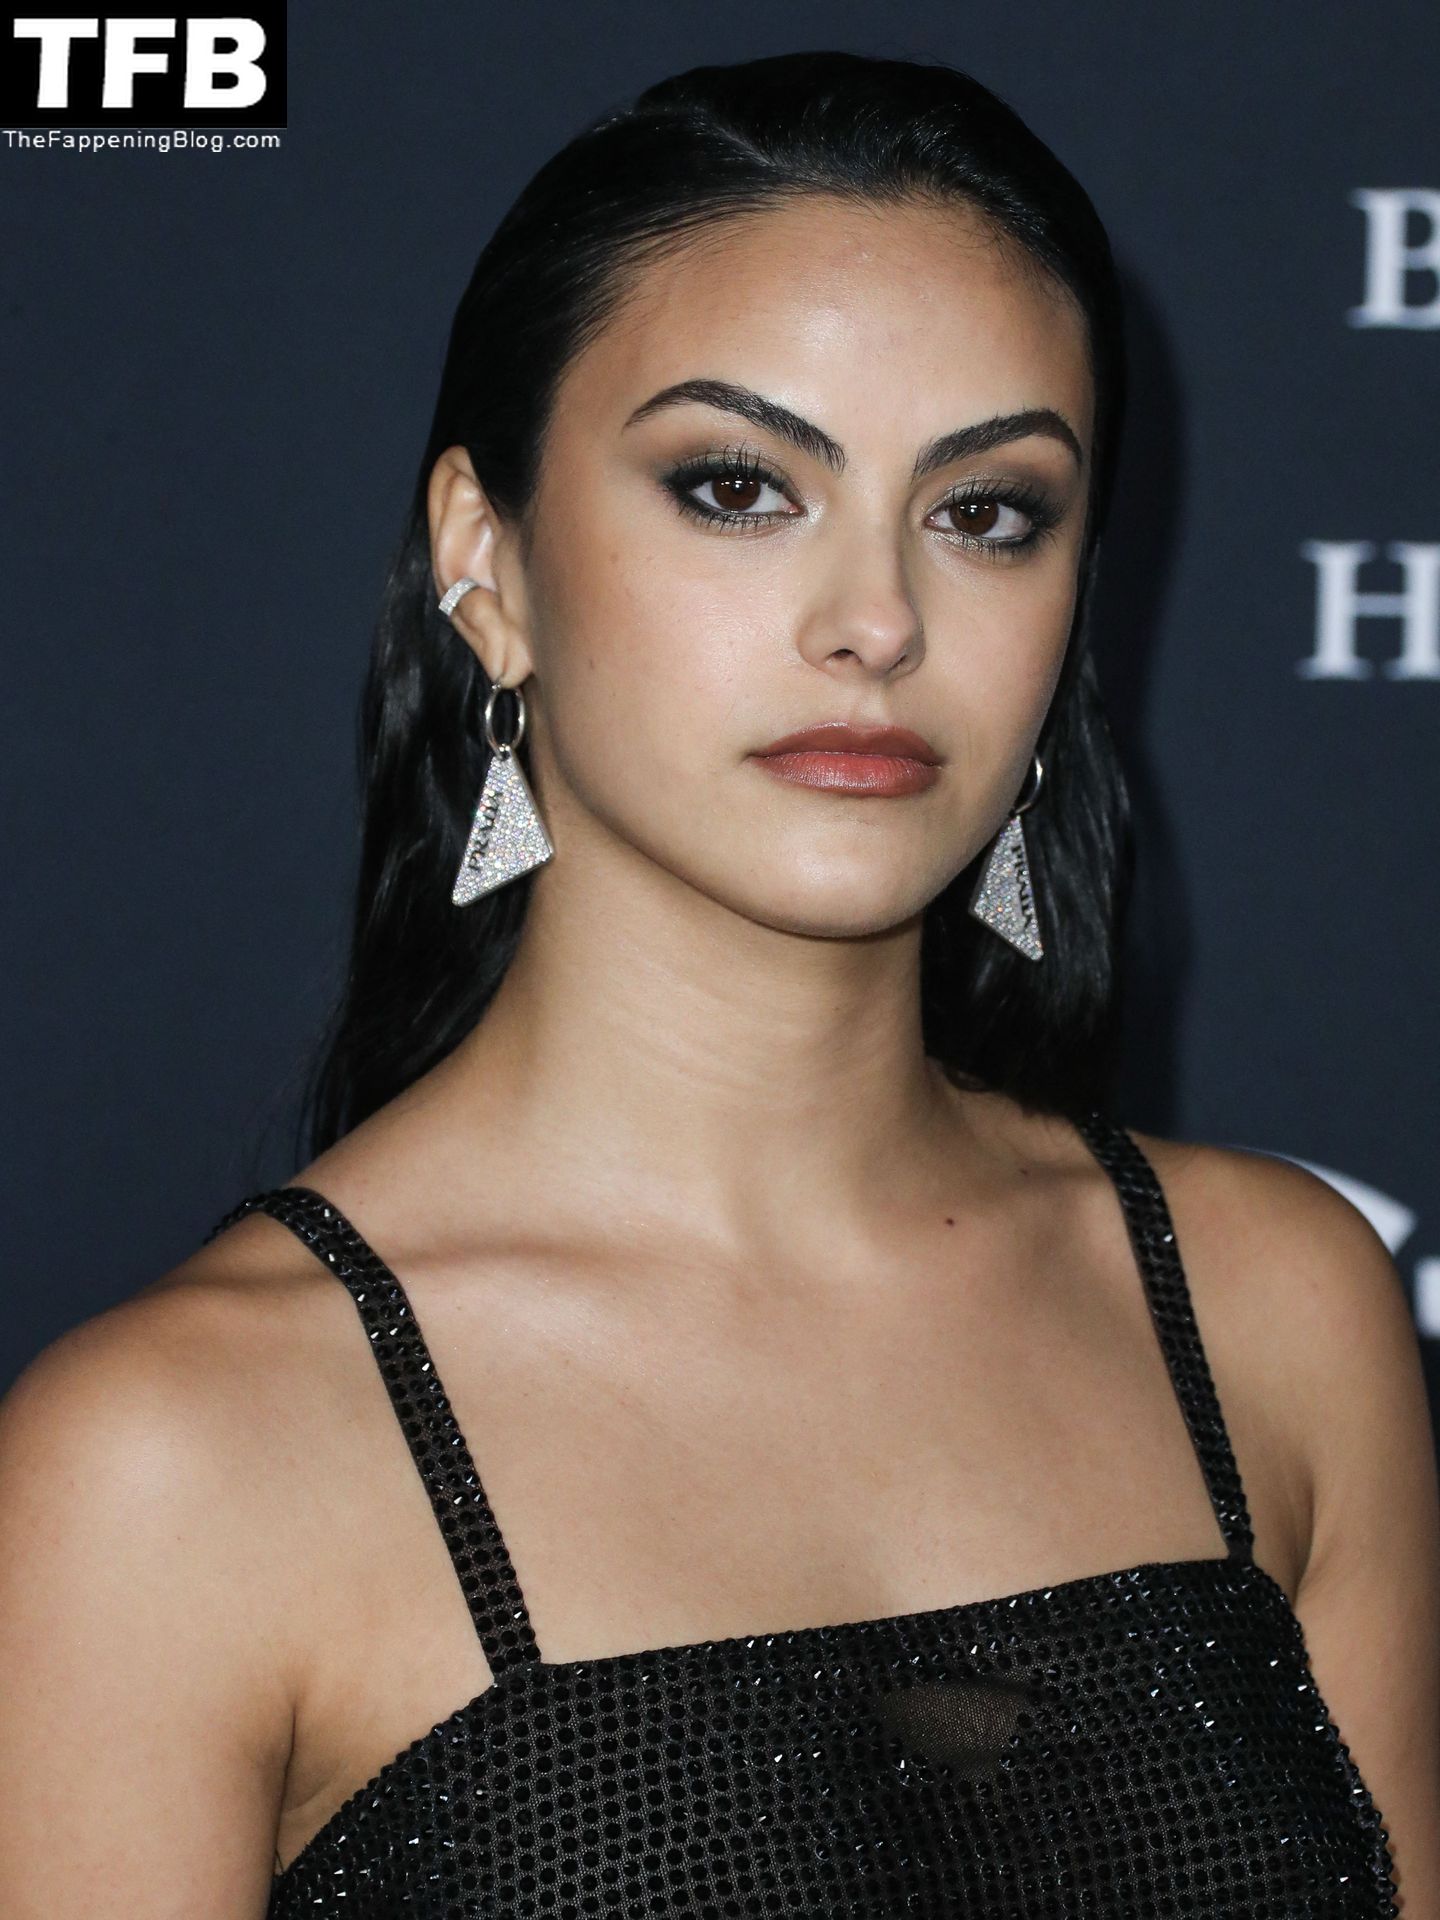 Camila-Mendes-See-Through-Tits-The-Fappening-Blog-21.jpg